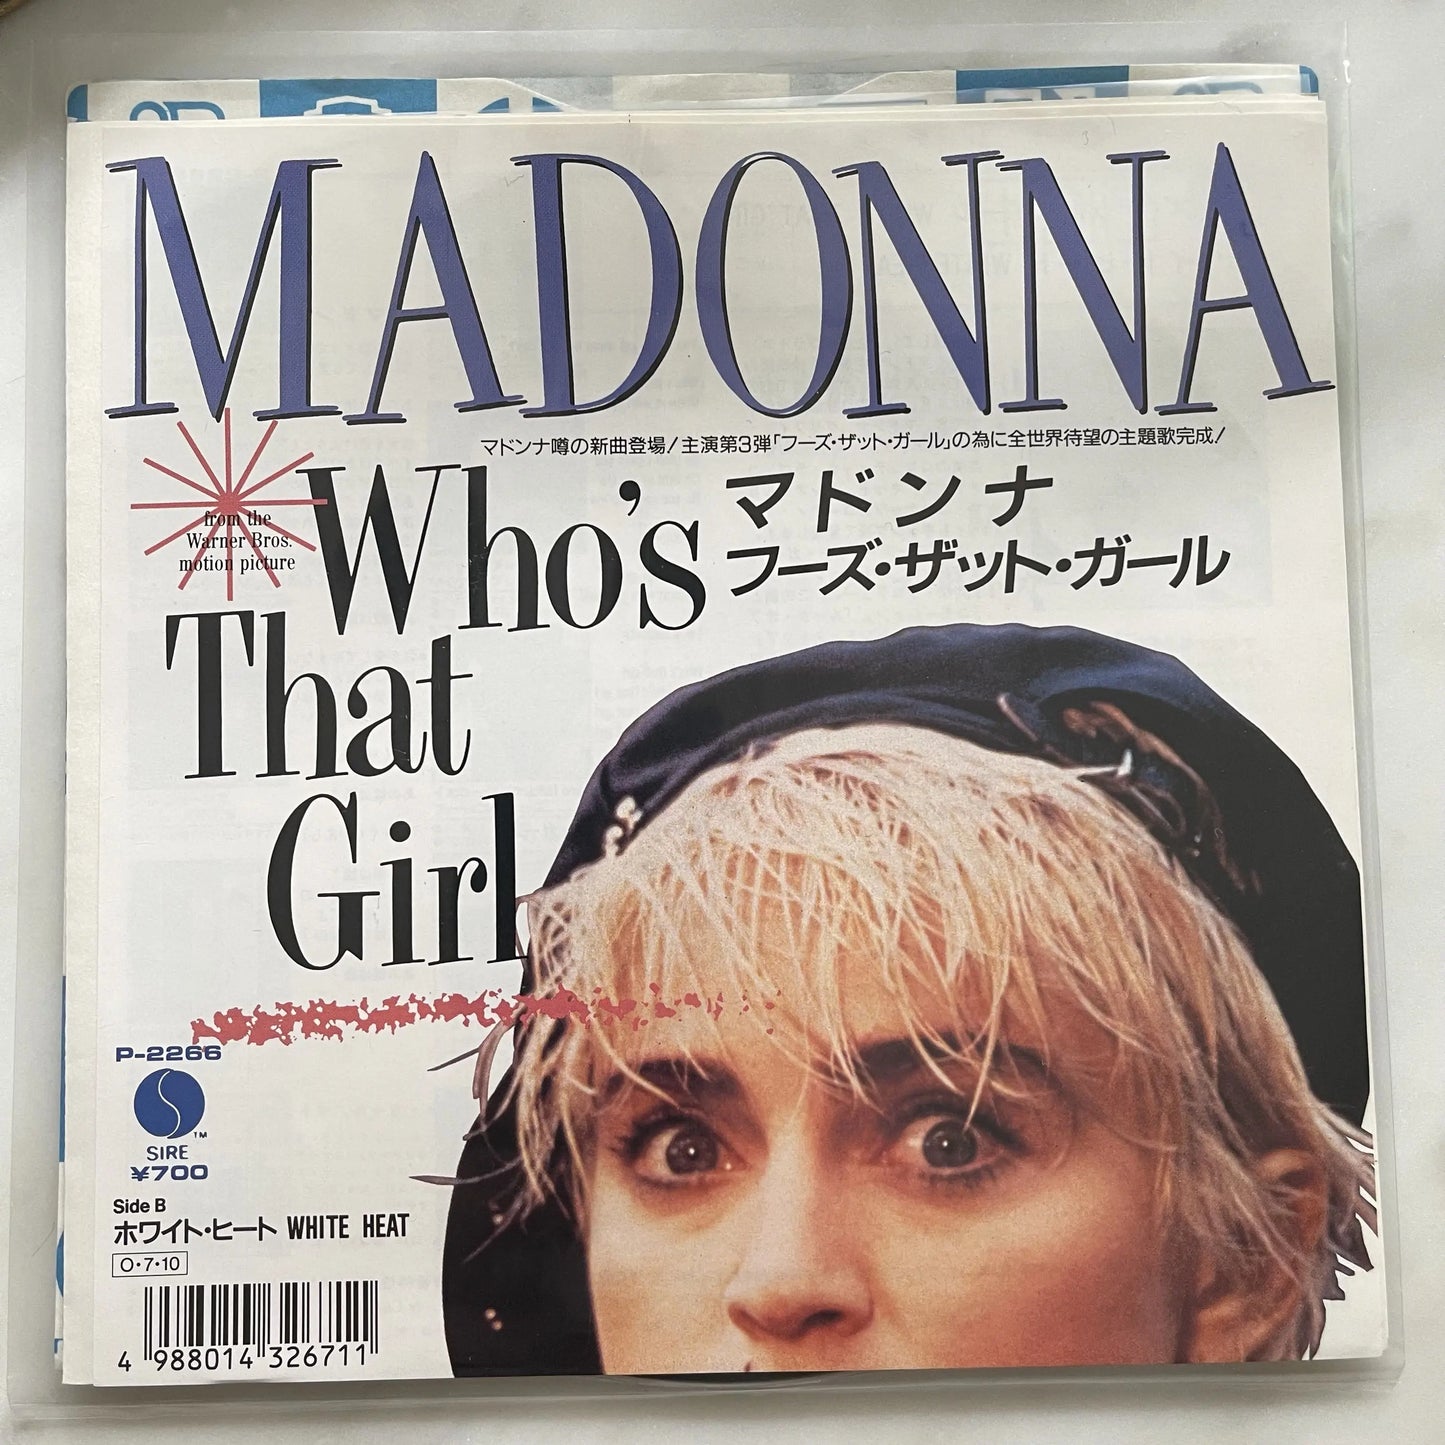 Madonna - Who's That Girl [Japanese 45 rpm 7" Single LP]